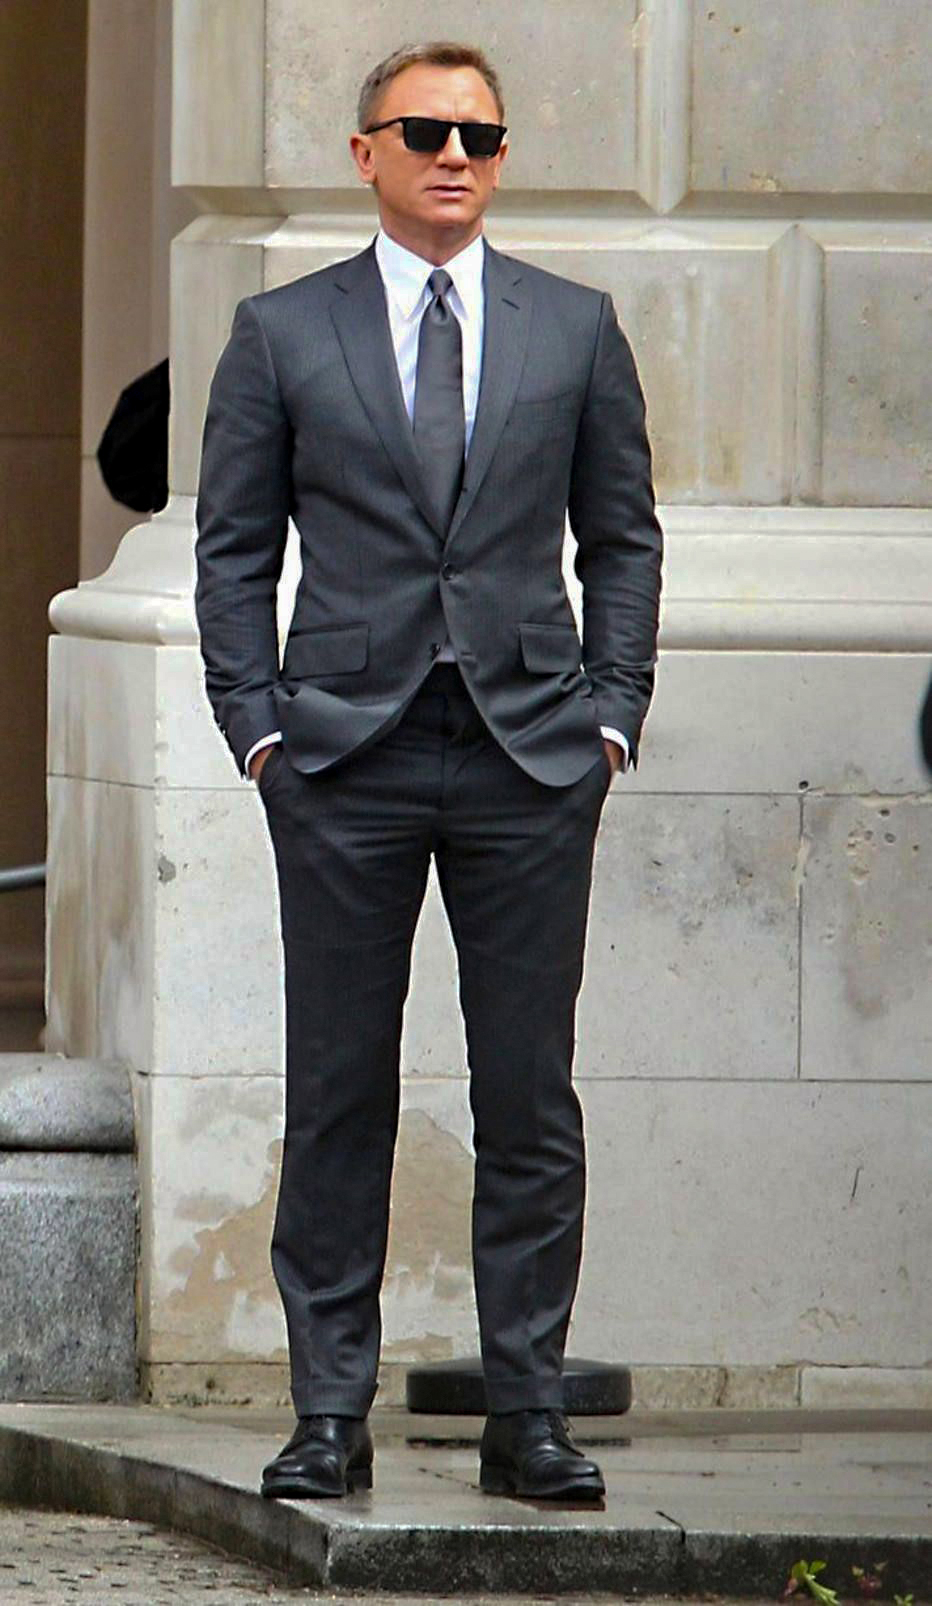 Charcoal Gray Suit Combinations